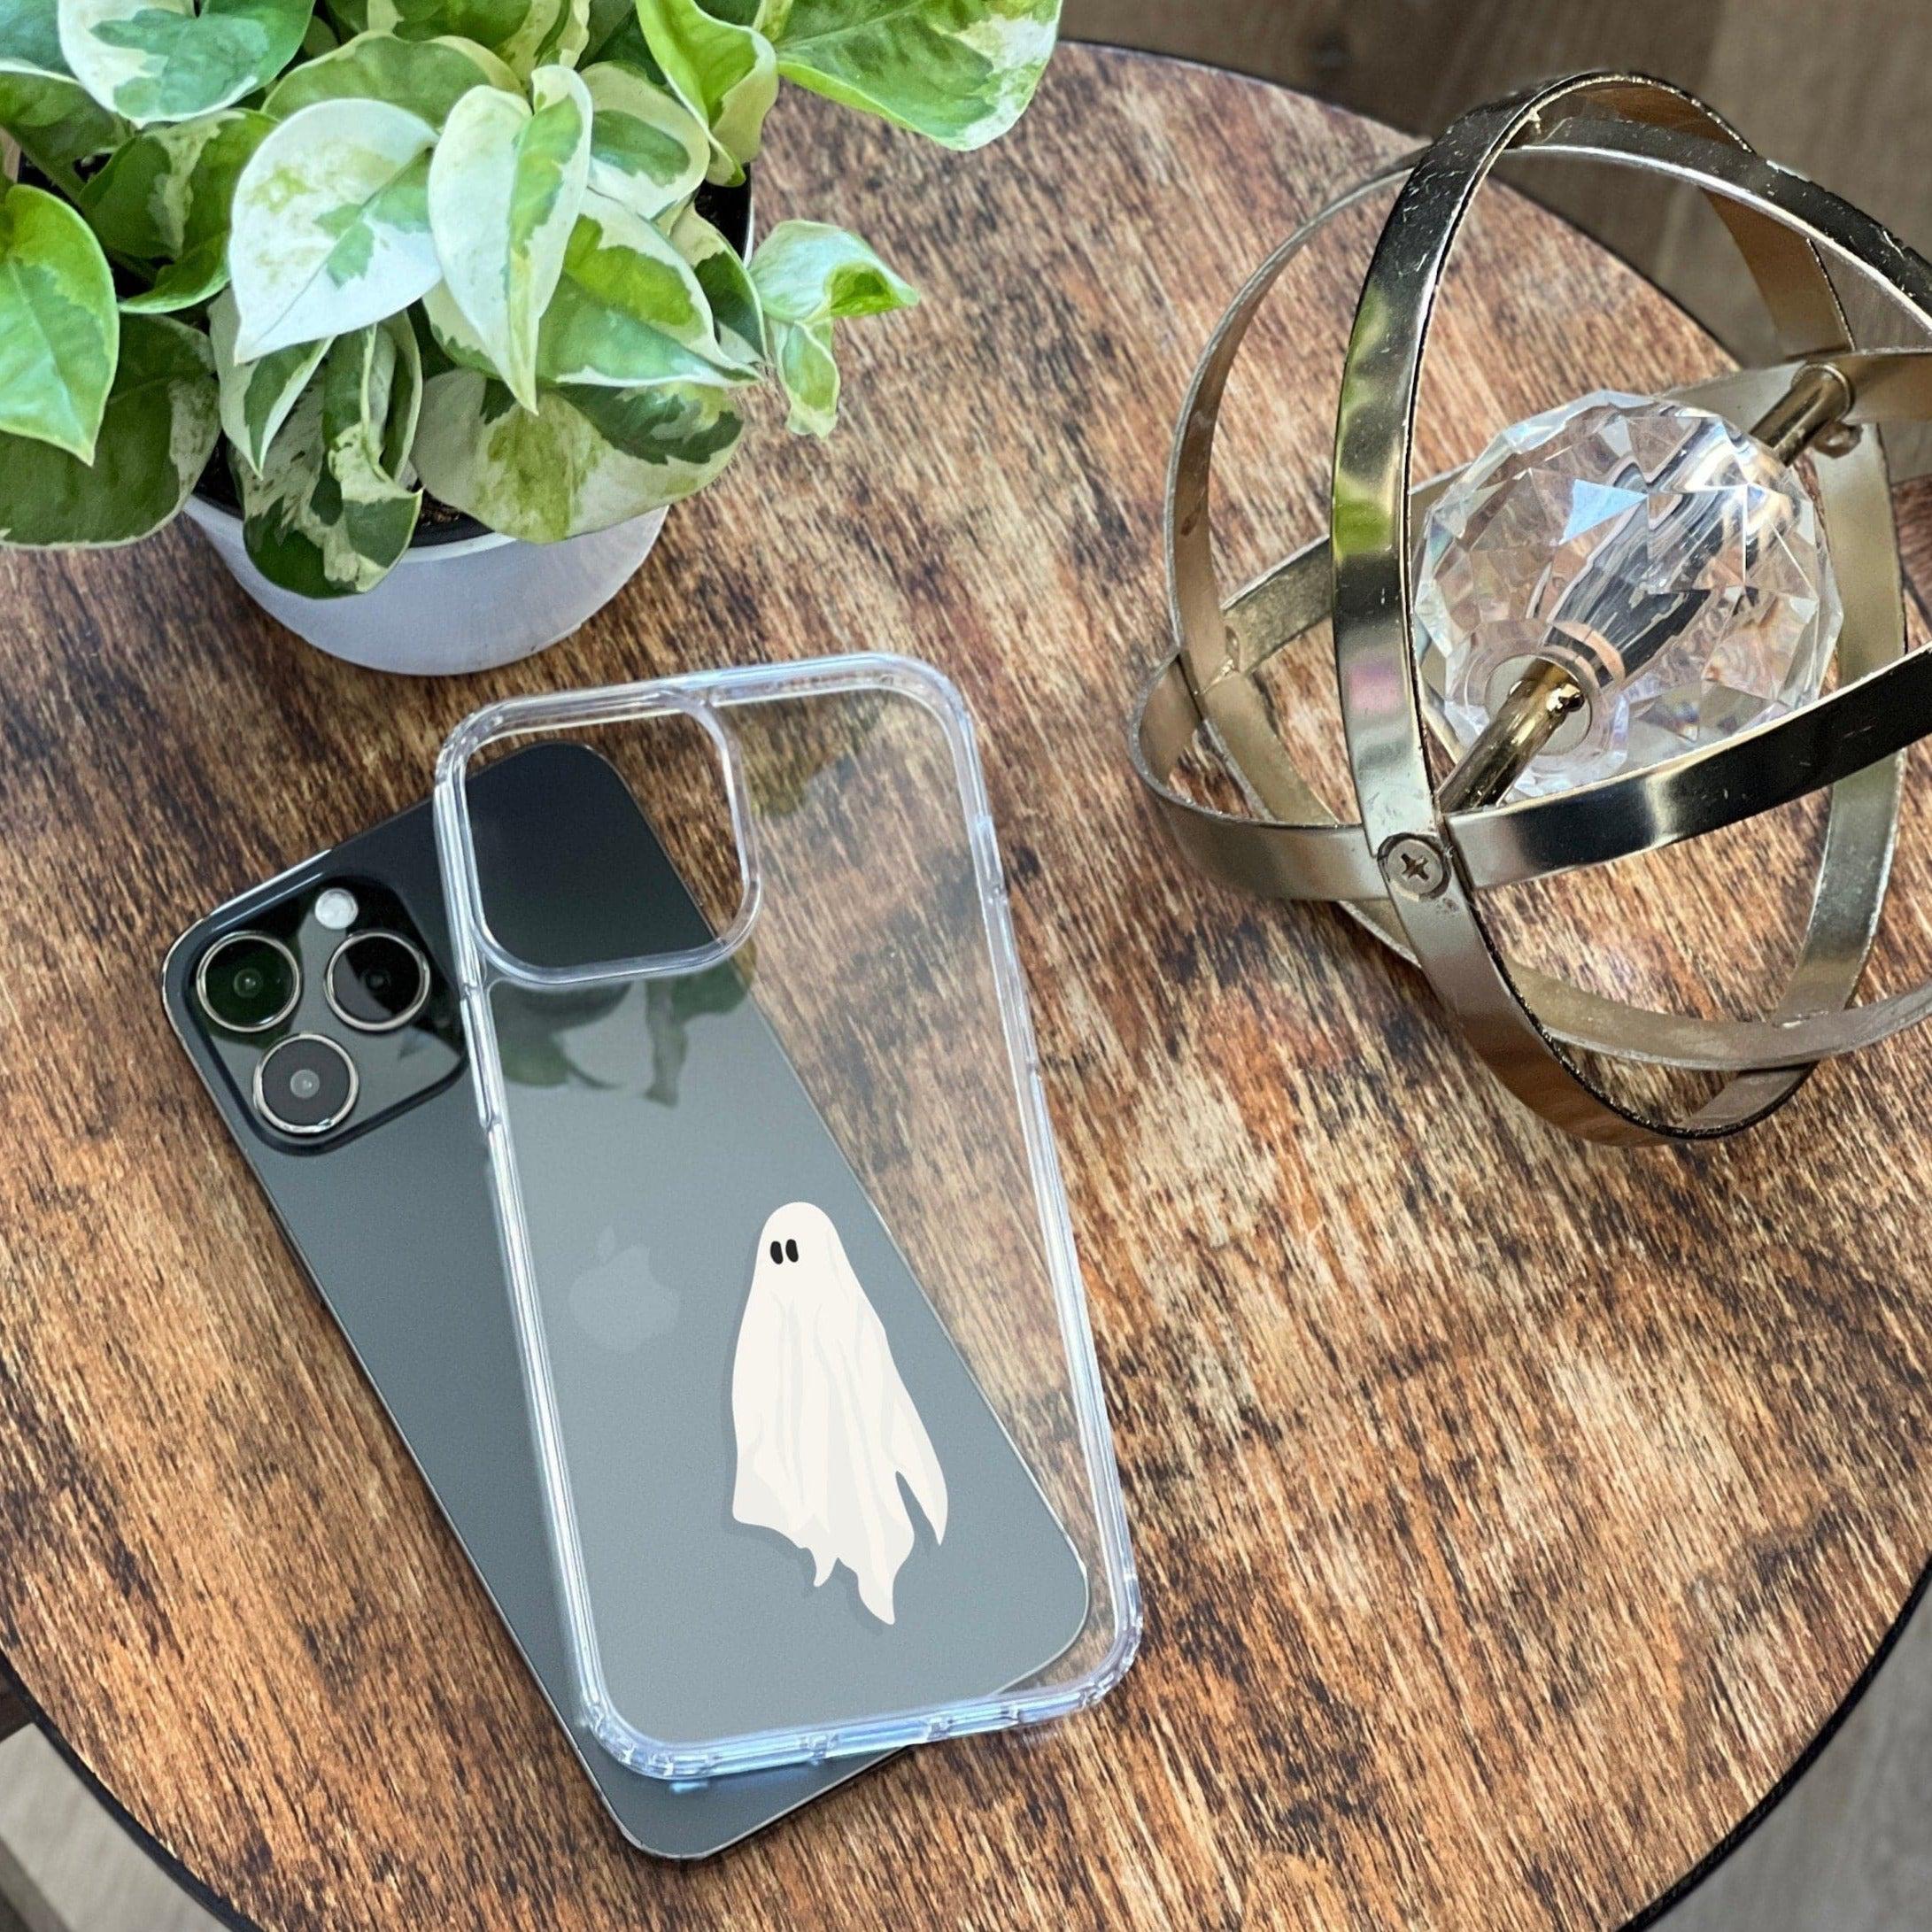 Minimal Line Art Faces Airpods Case by The Urban Flair